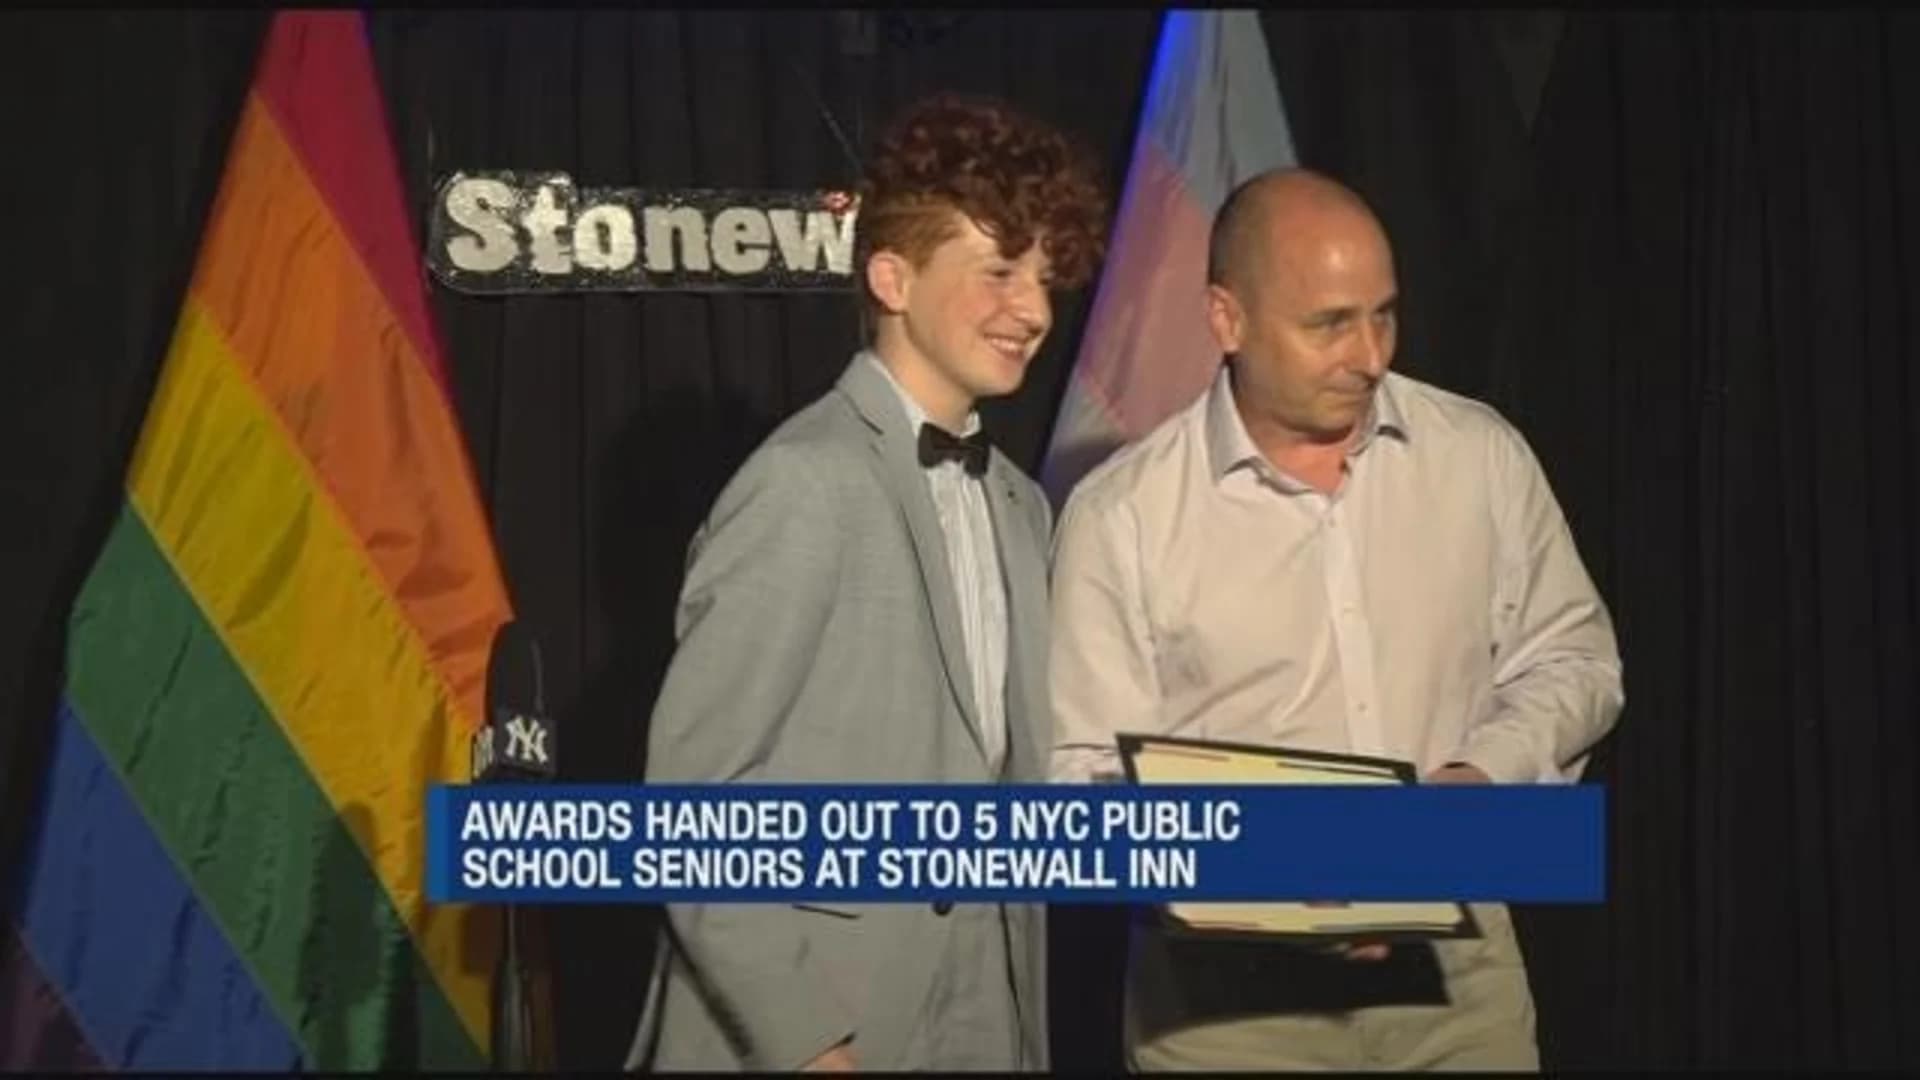 Yankees honor 5 NYC students in LGBTQ community